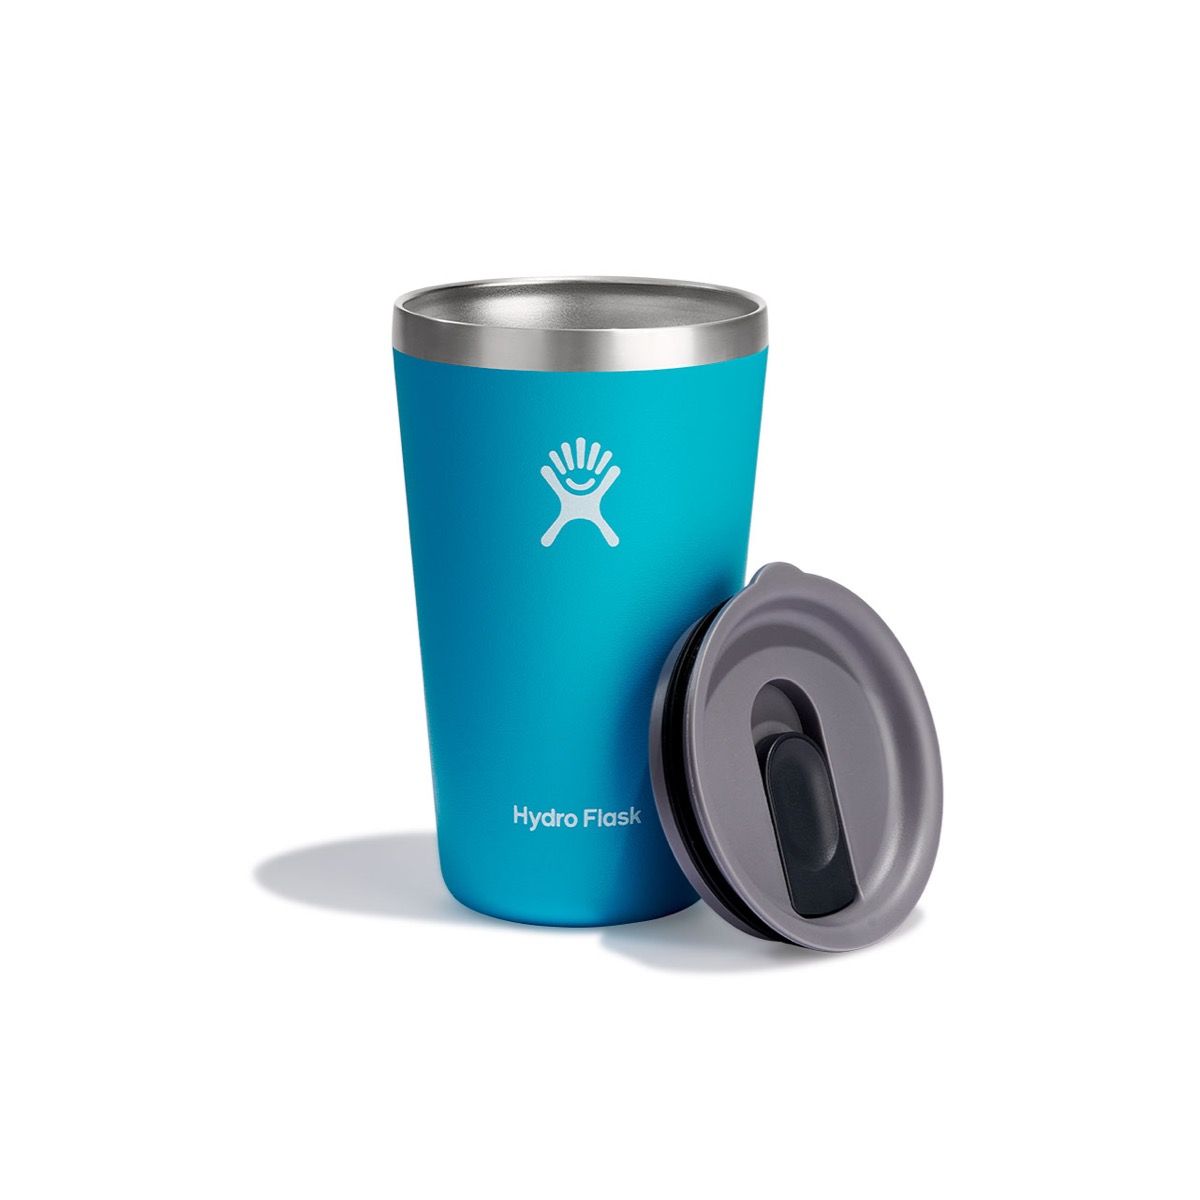 Hydro Flask Tumbler - Stainless Steel, Reusable, Vacuum Insulated with  Press-in Lid